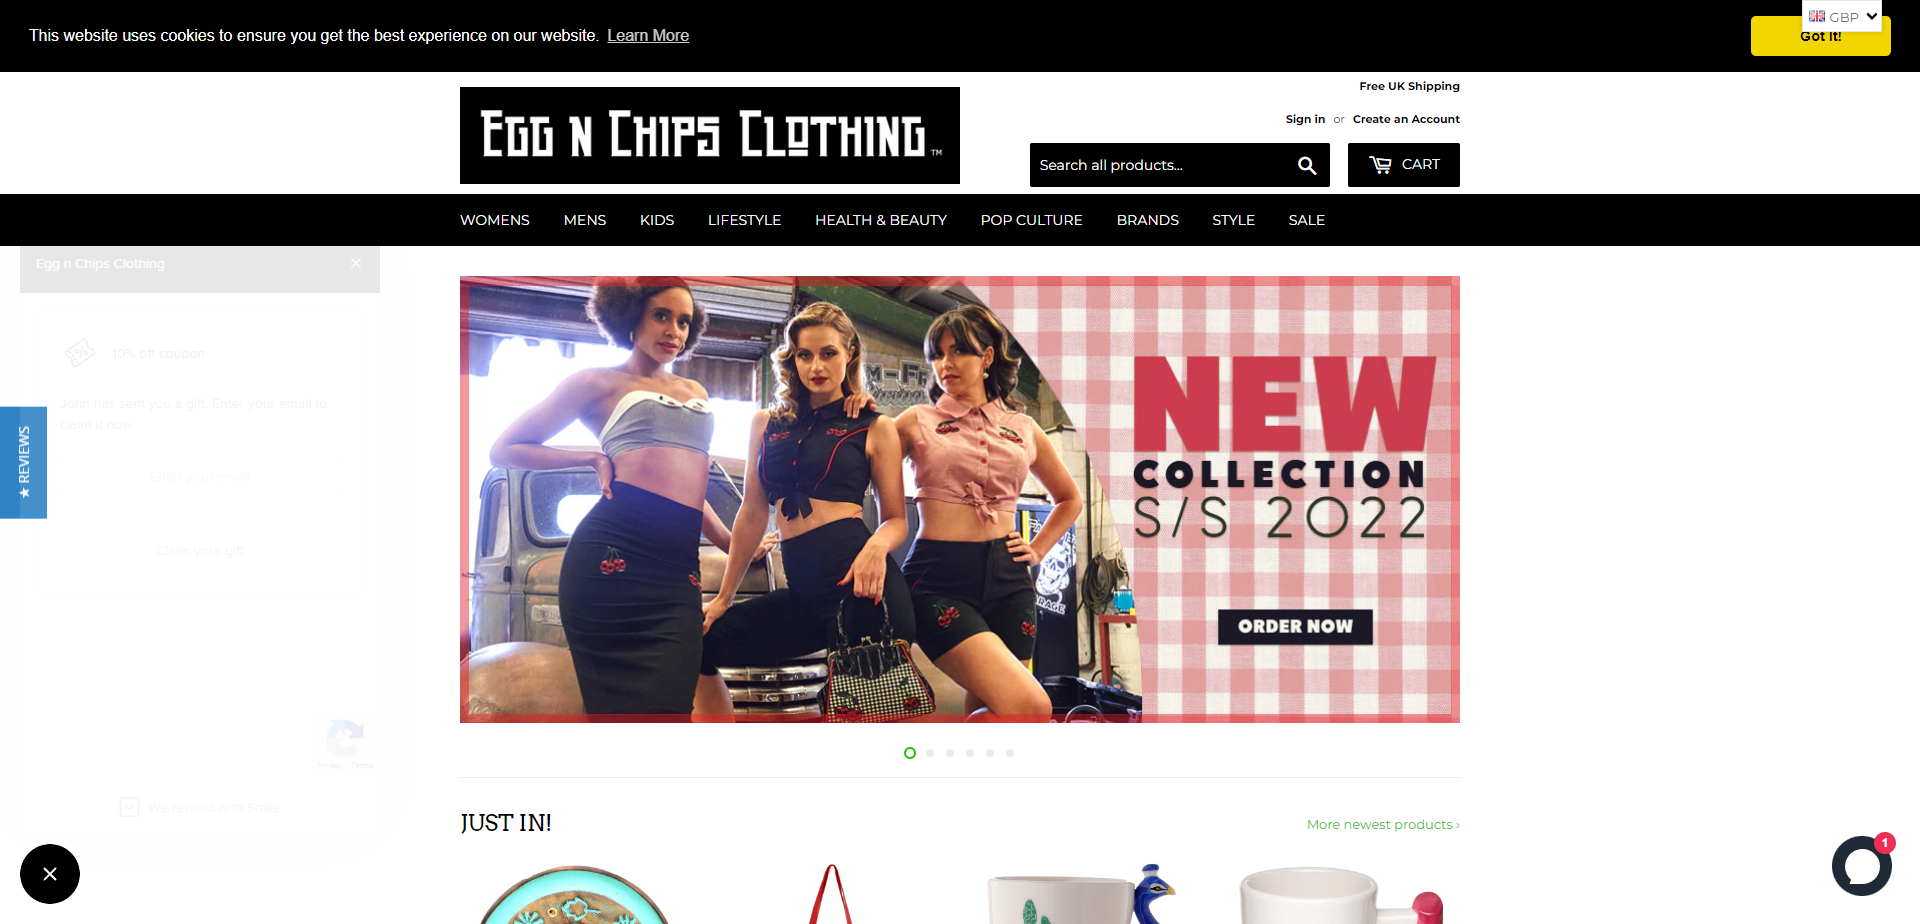 Referral Landing Page for Egg n Chips Clothing